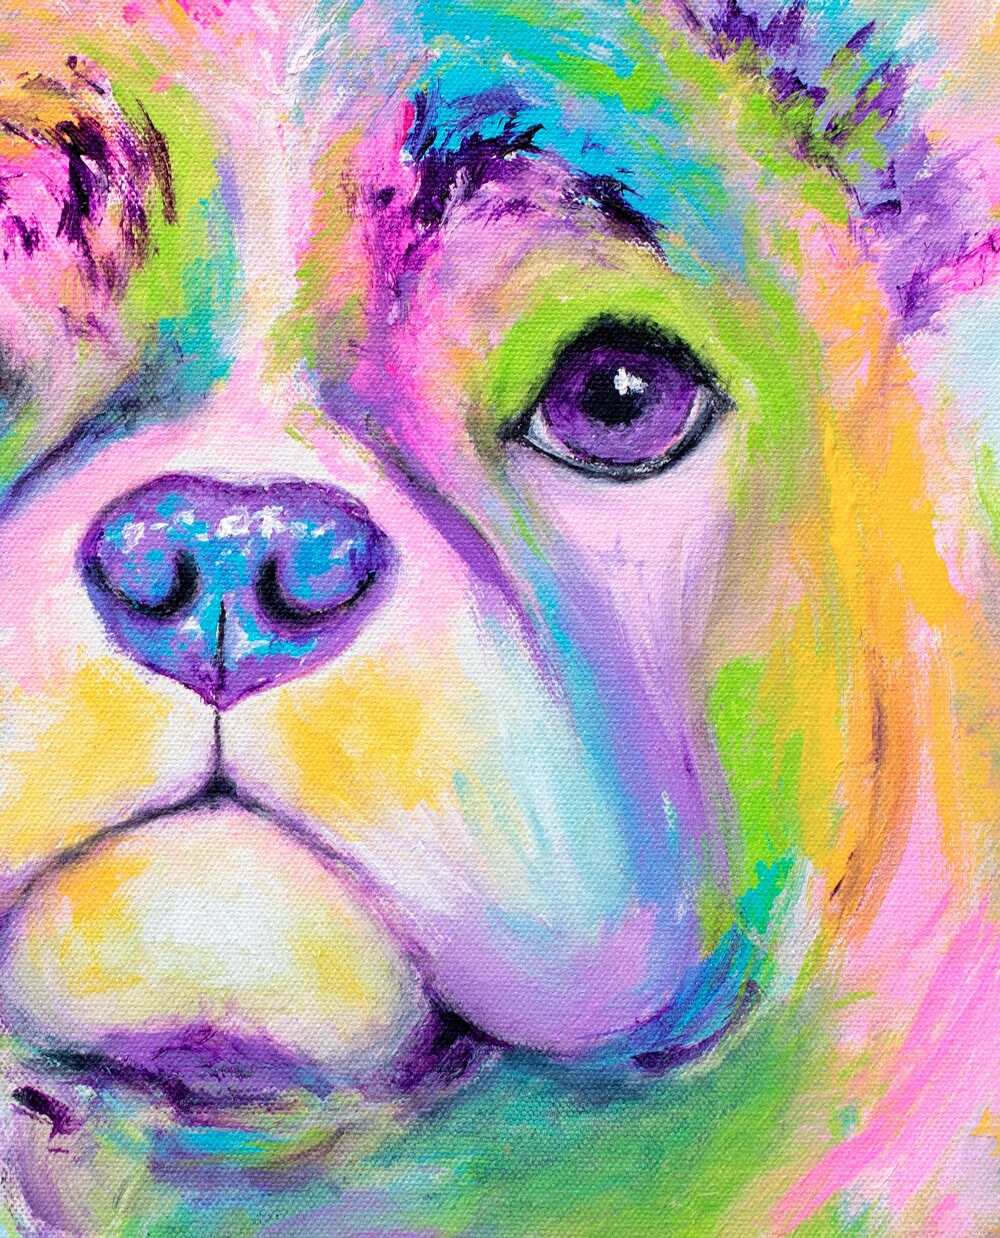 French Bulldog Print - Frenchie. French Bulldog Art on Paper or Canvas of French Bulldog Painting by Krystle Cole